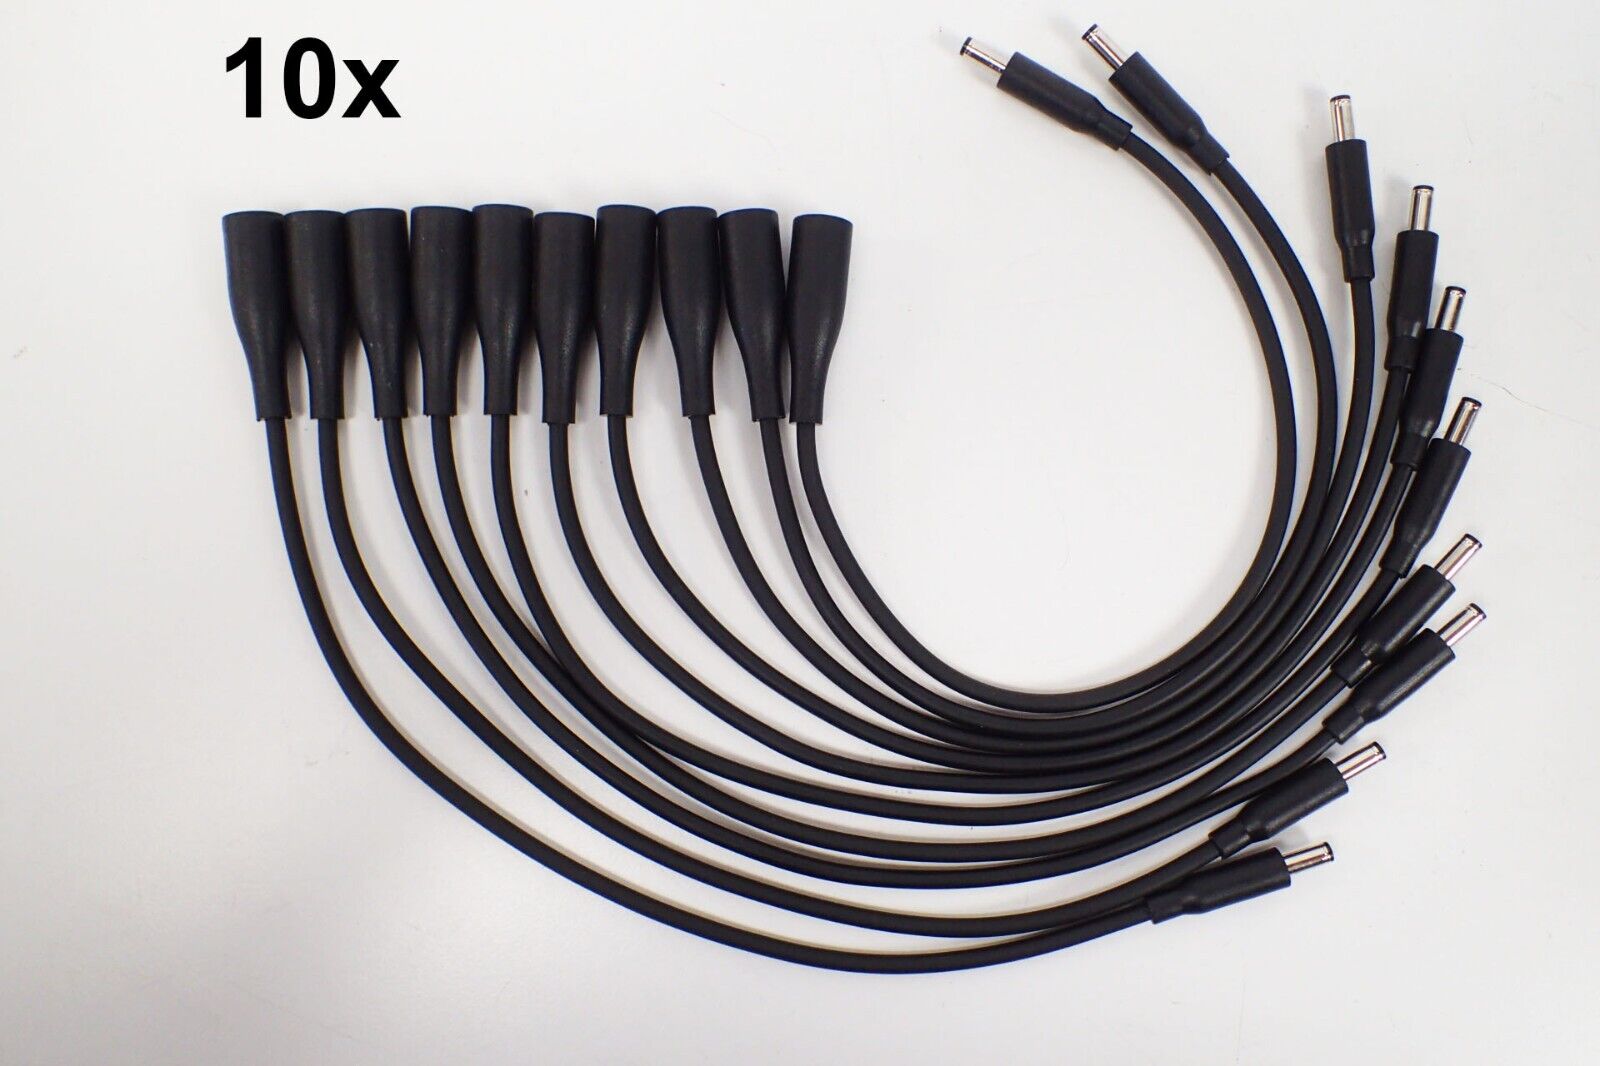 10x Power Charger Converter Adapter Cable 7.4mm To 4.5mm For dell Small Tips